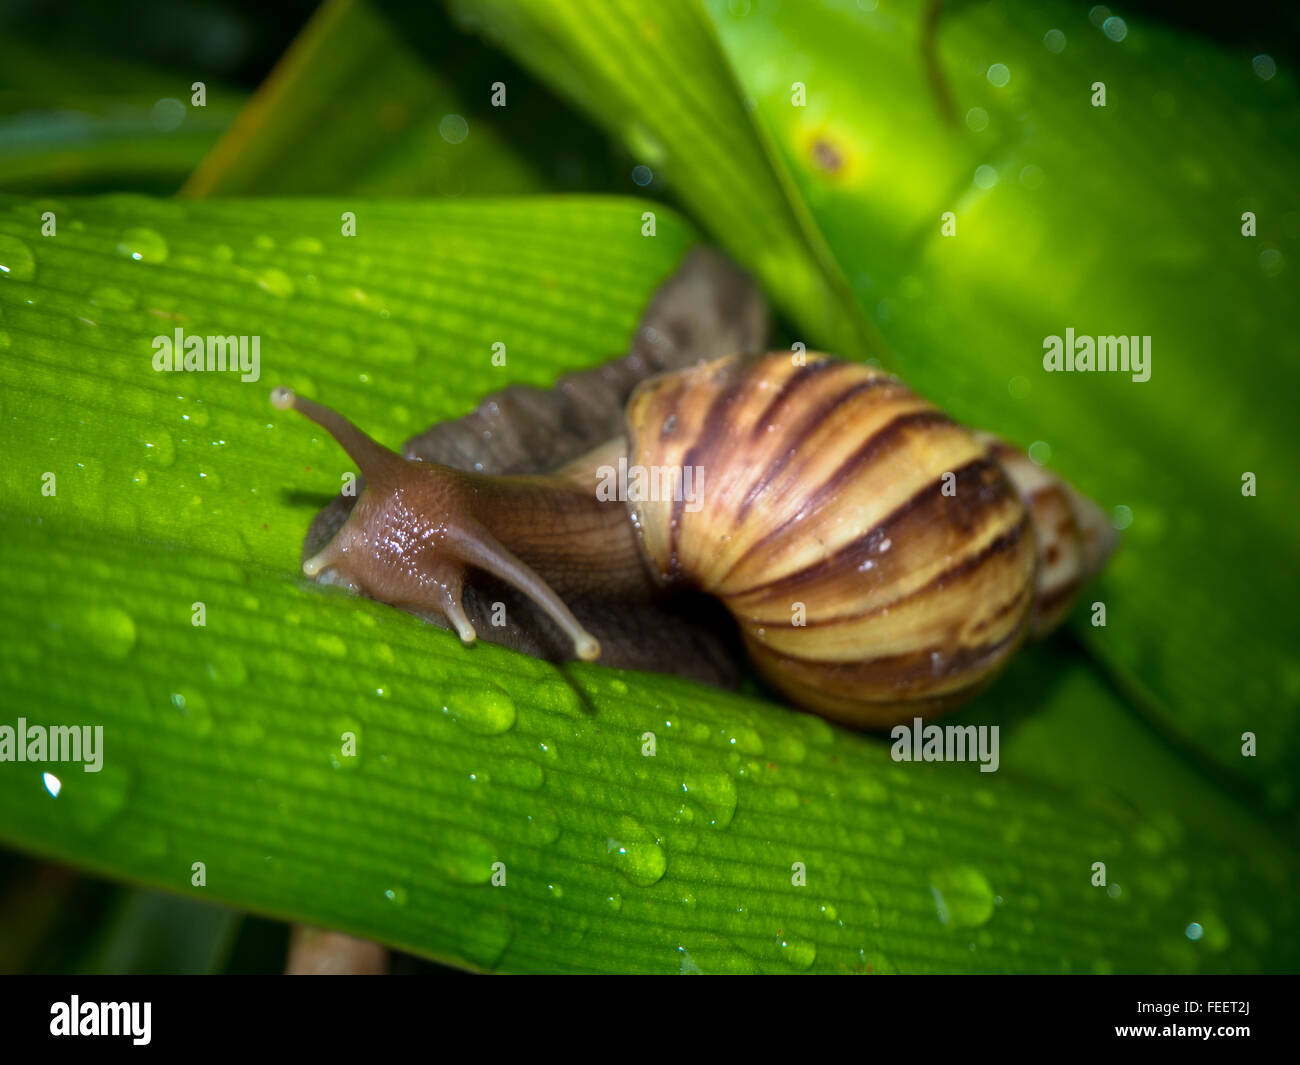 Snail on leaf green of nature Stock Photo